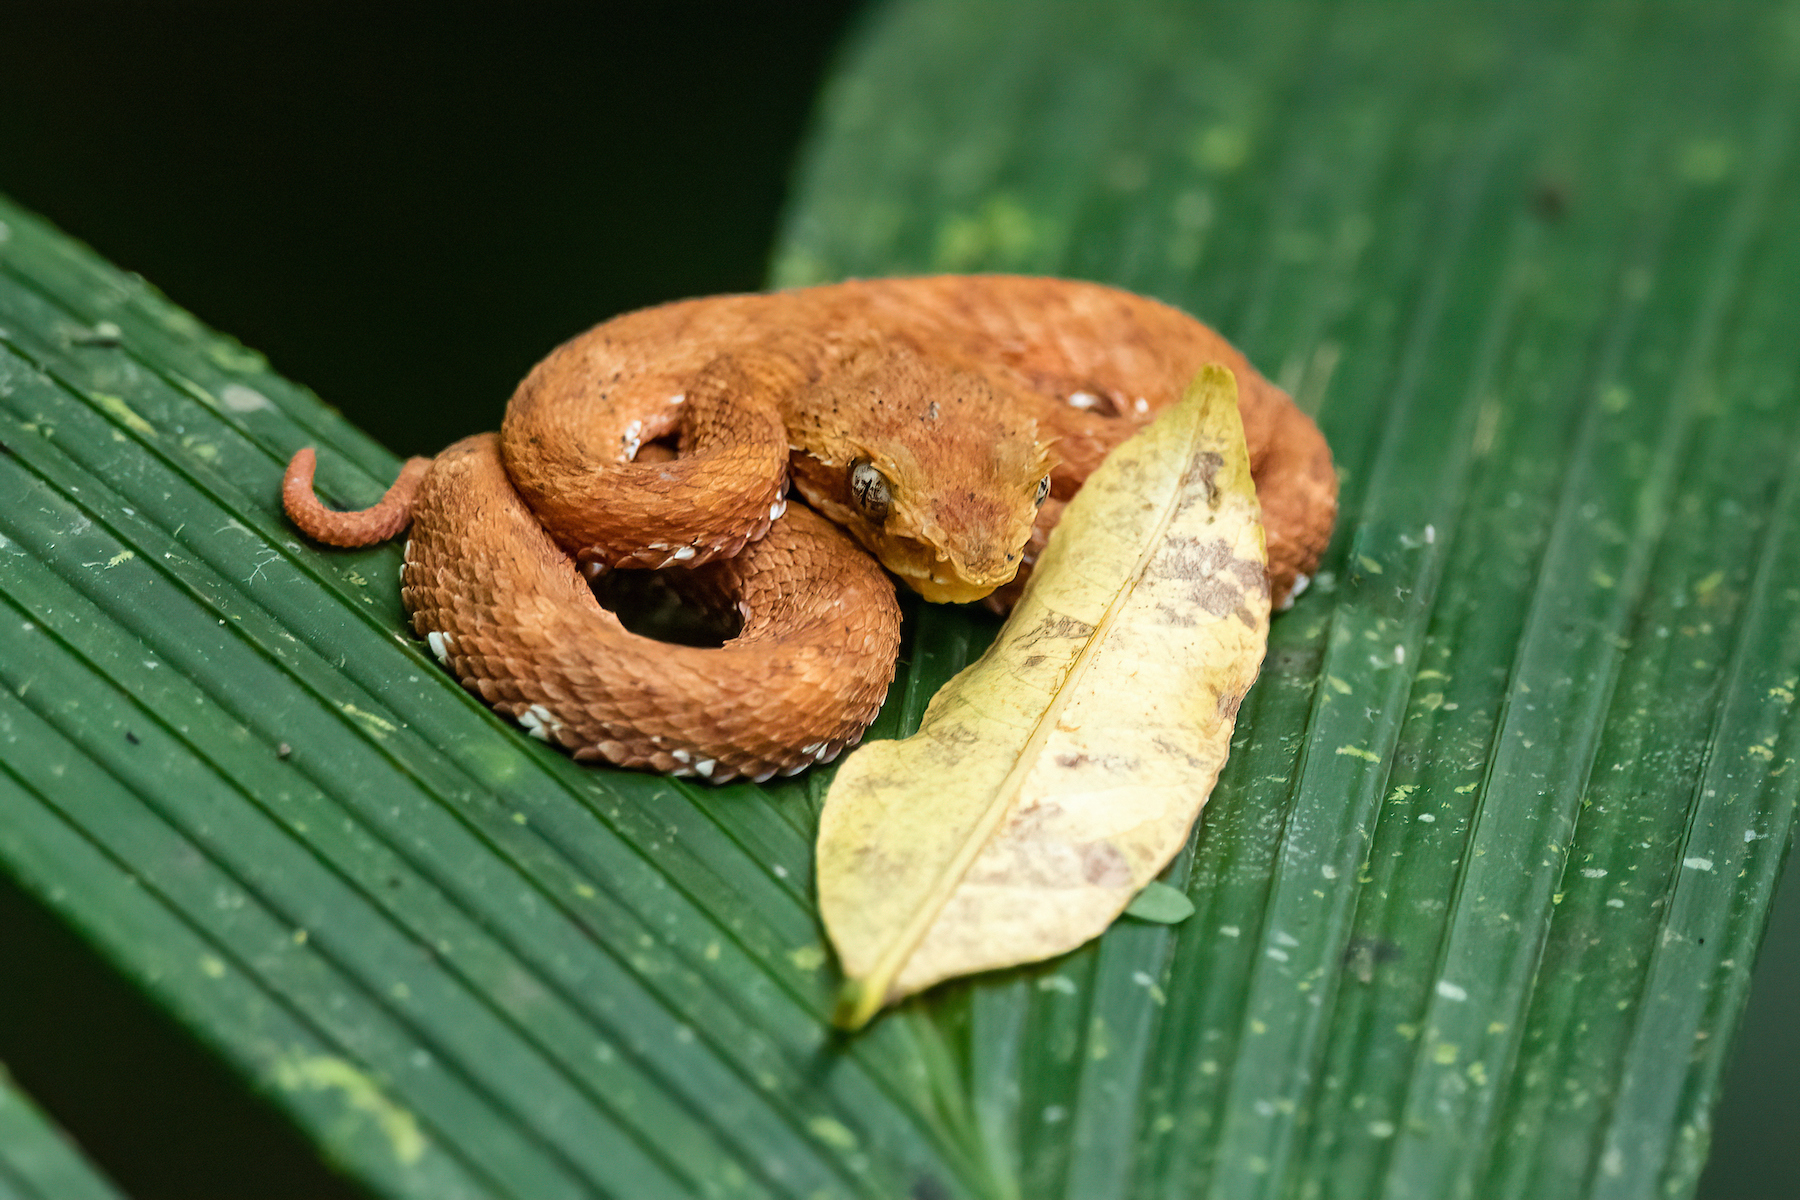 A wild Eyelash Viper curled up on a palm frond in the rainforest on our Costa Rica wildlife photography tour